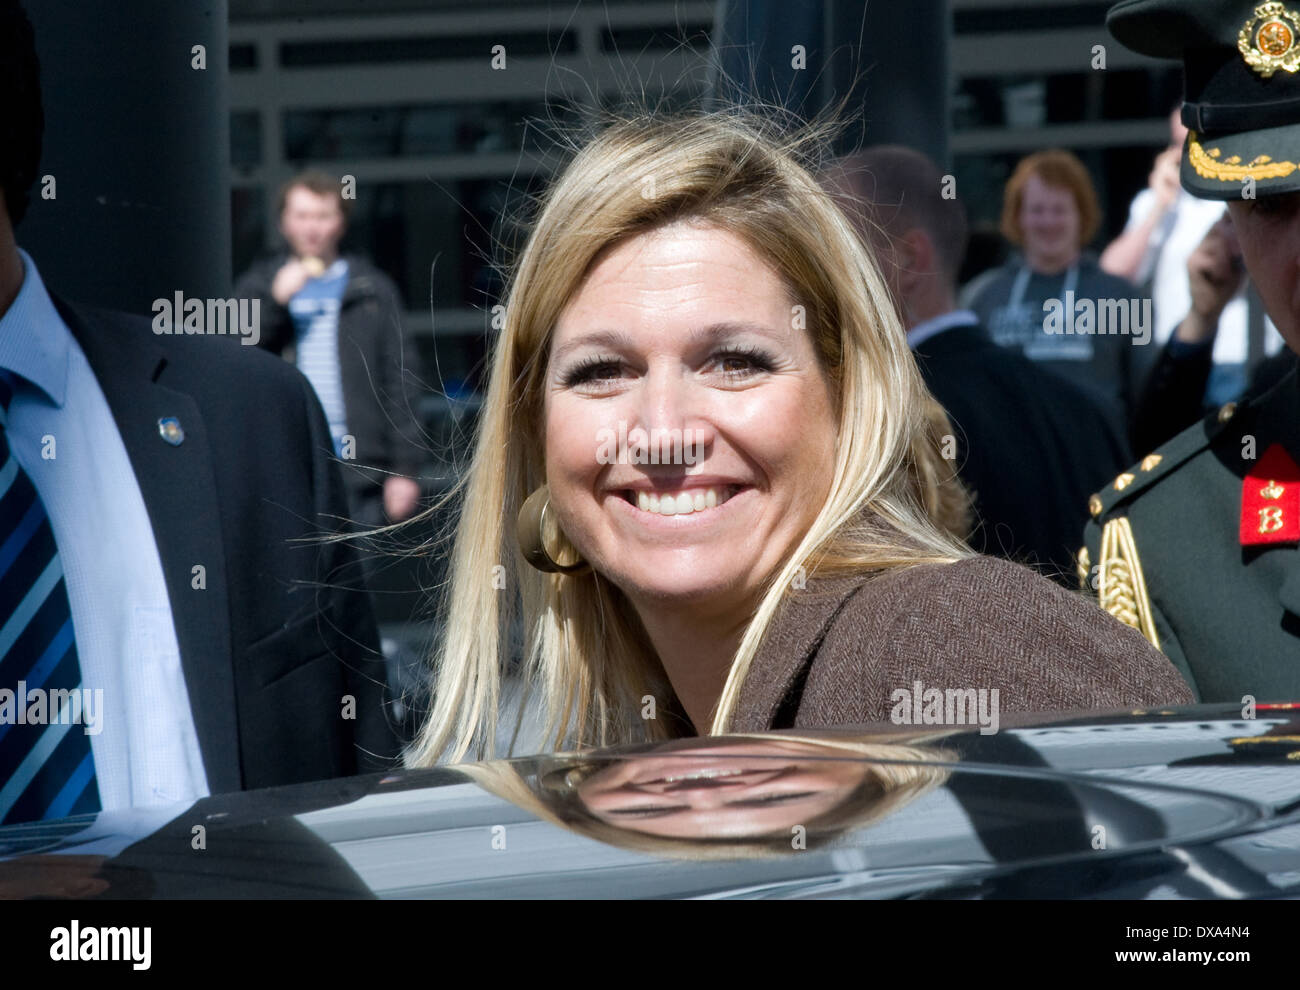 Queen Maxima of the Netherlands stepping in to a car Stock Photo